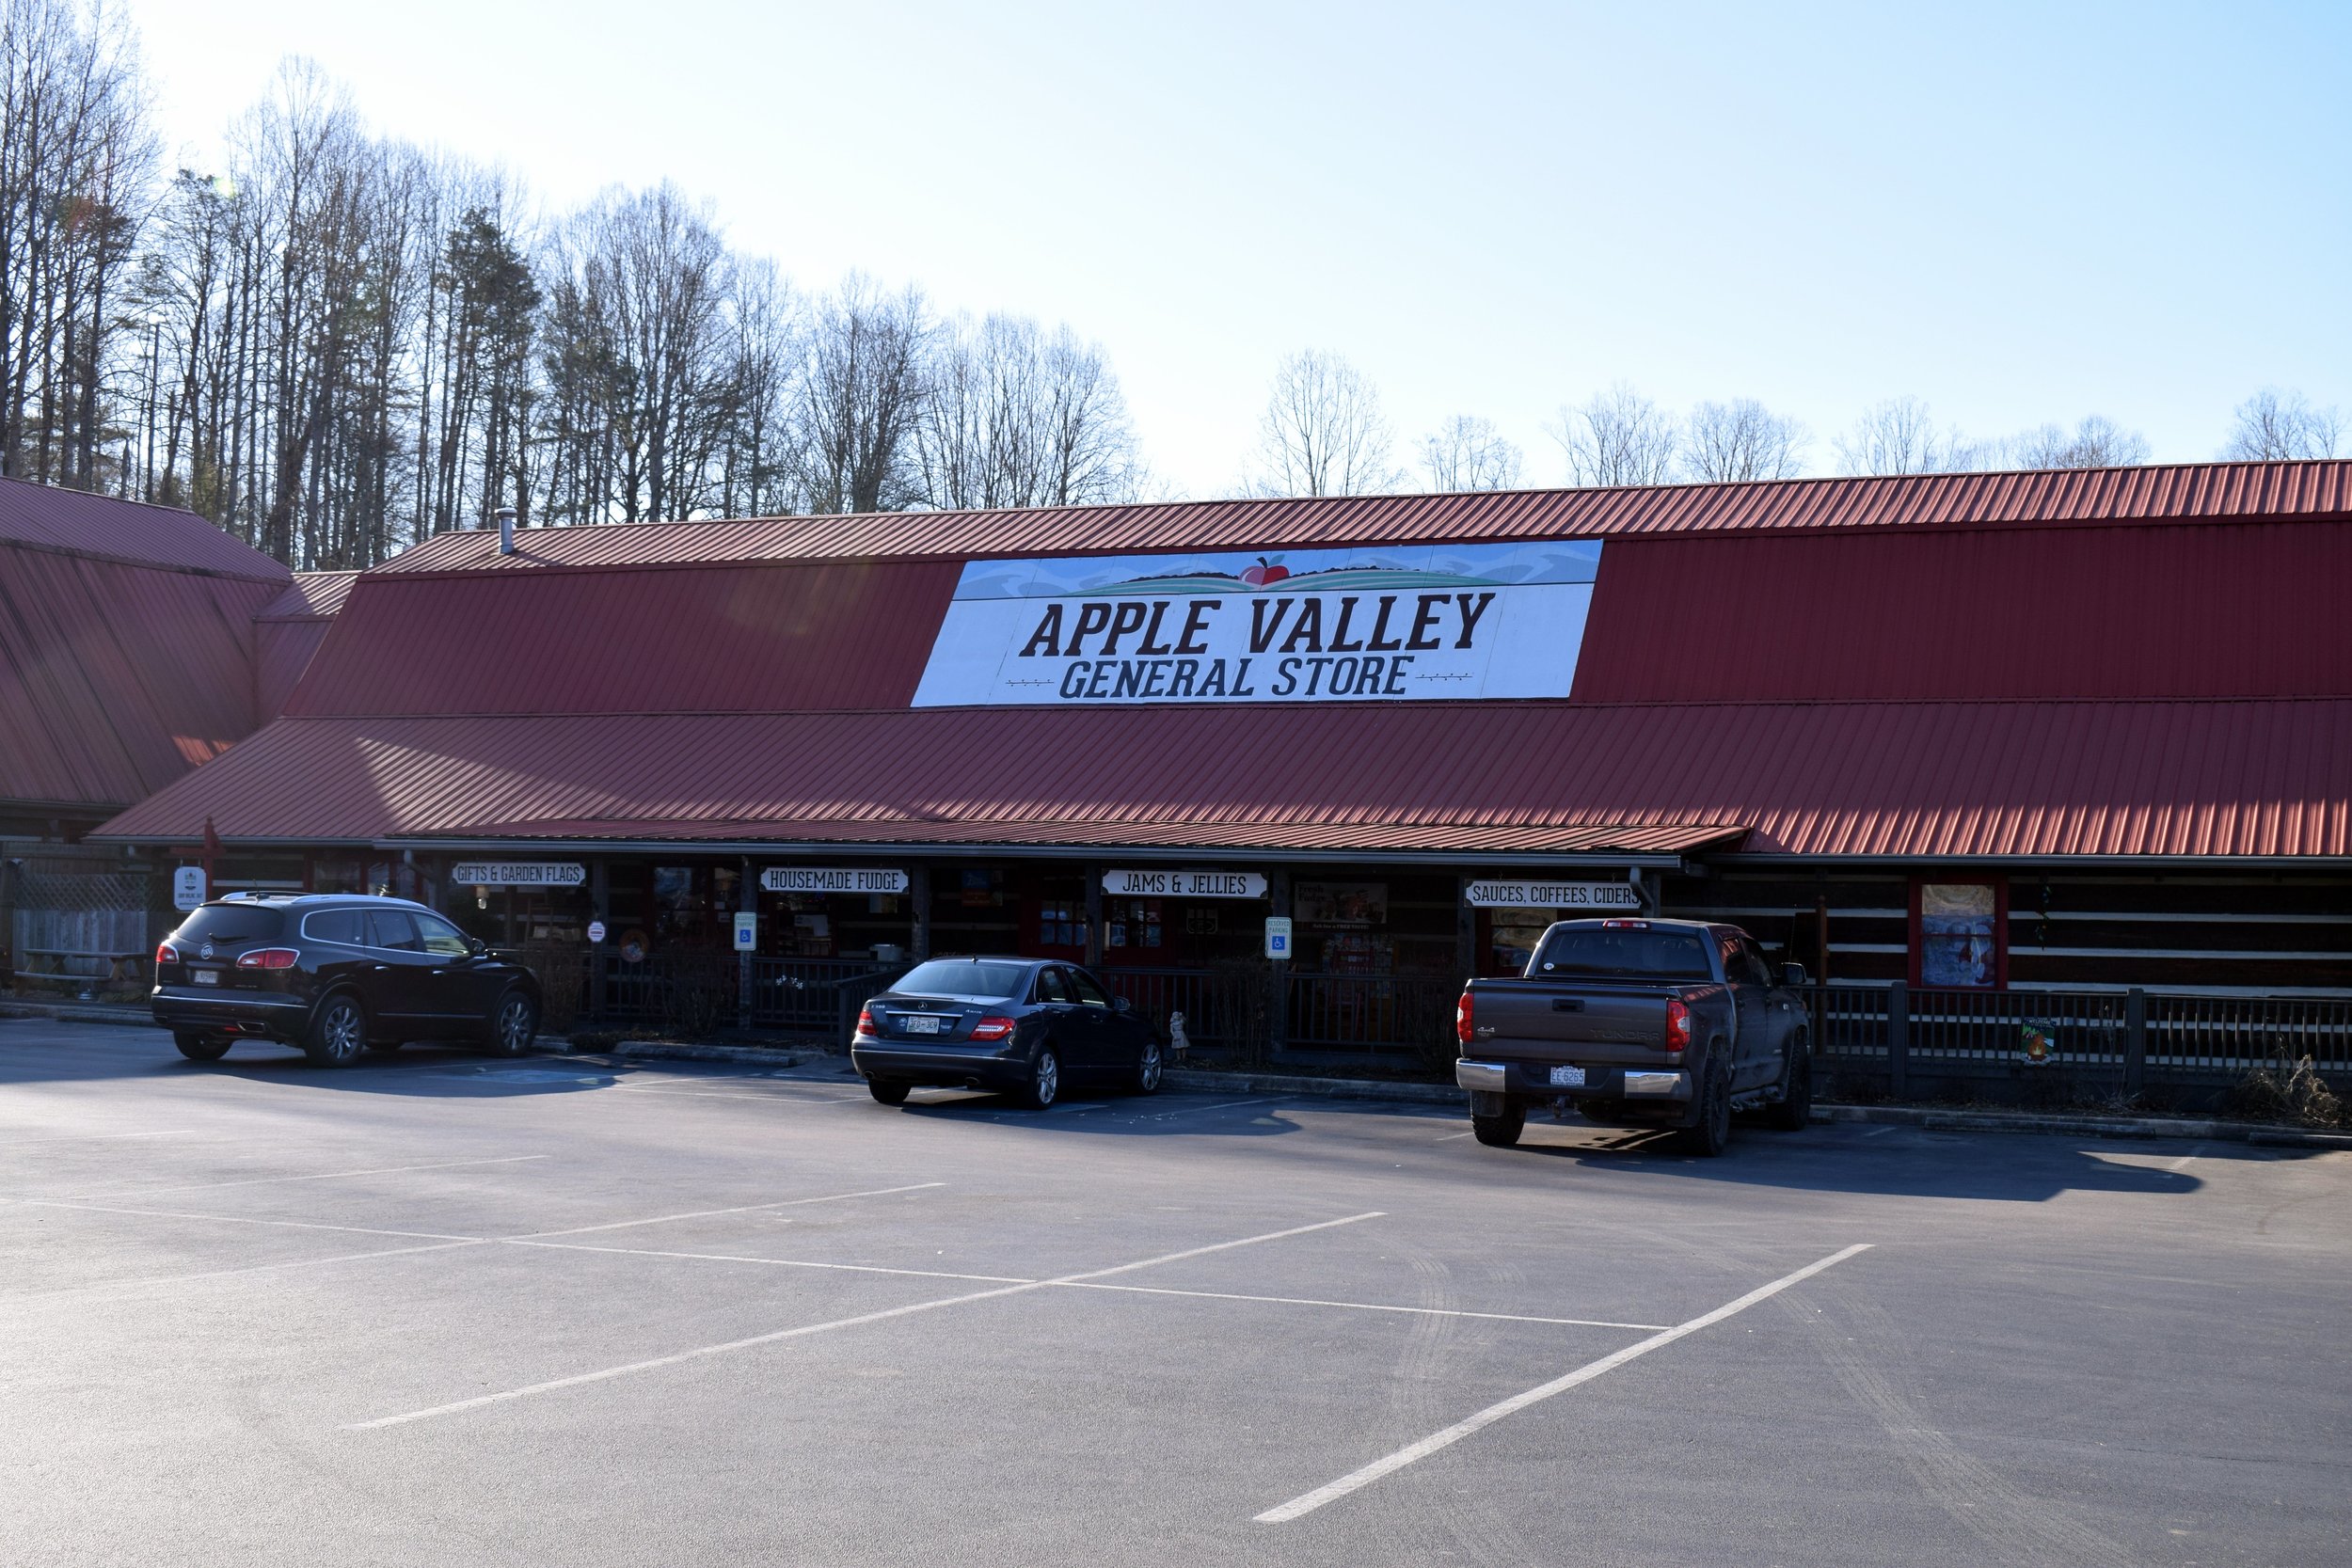 Apple Valley General Store in Townsend, Tennessee